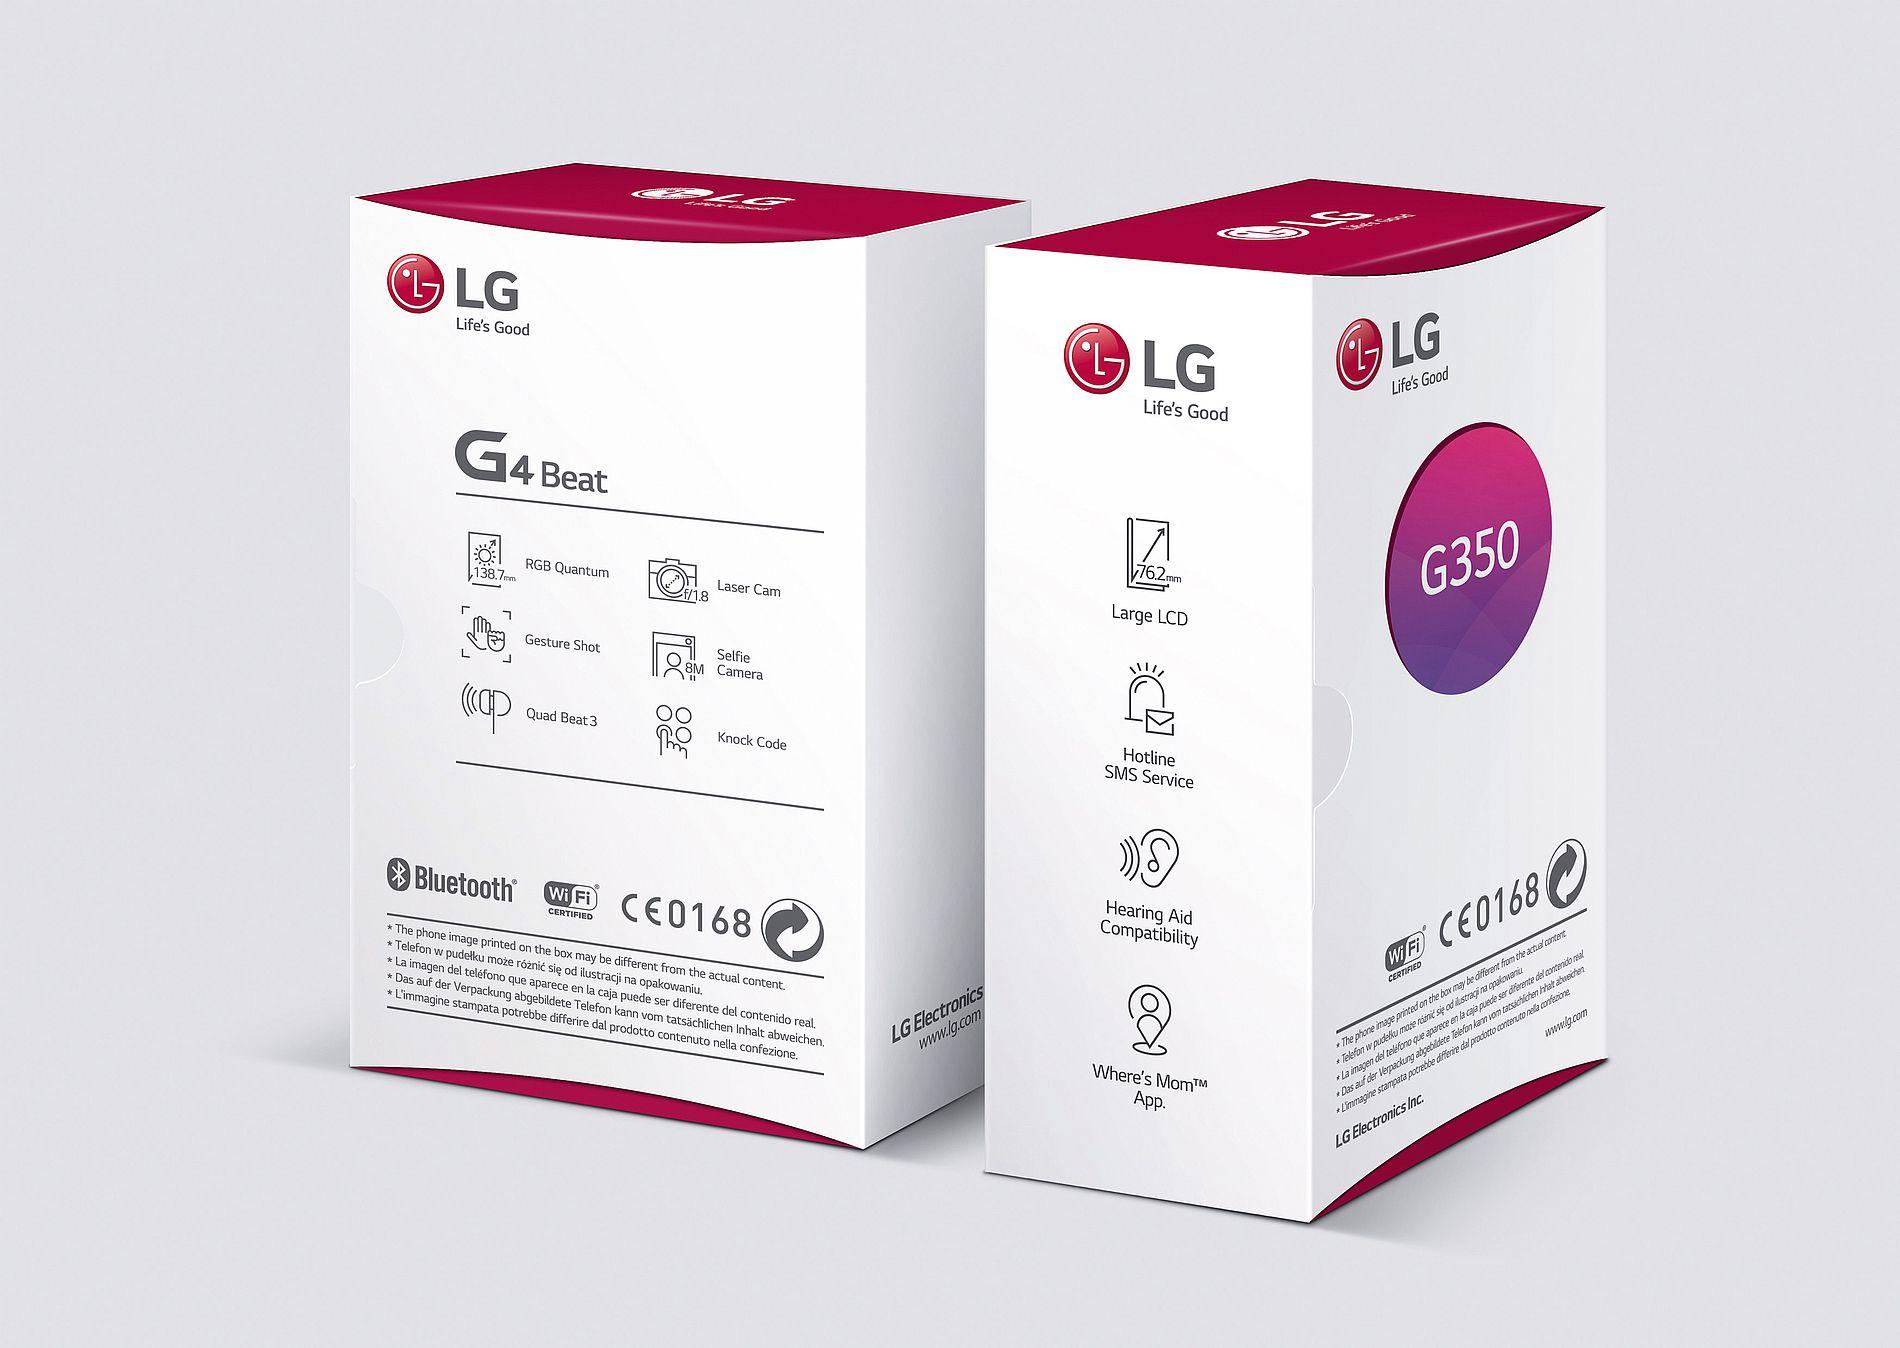 L and G with a Red Dot Logo - Red Dot Design Award: LG USP Pictogram